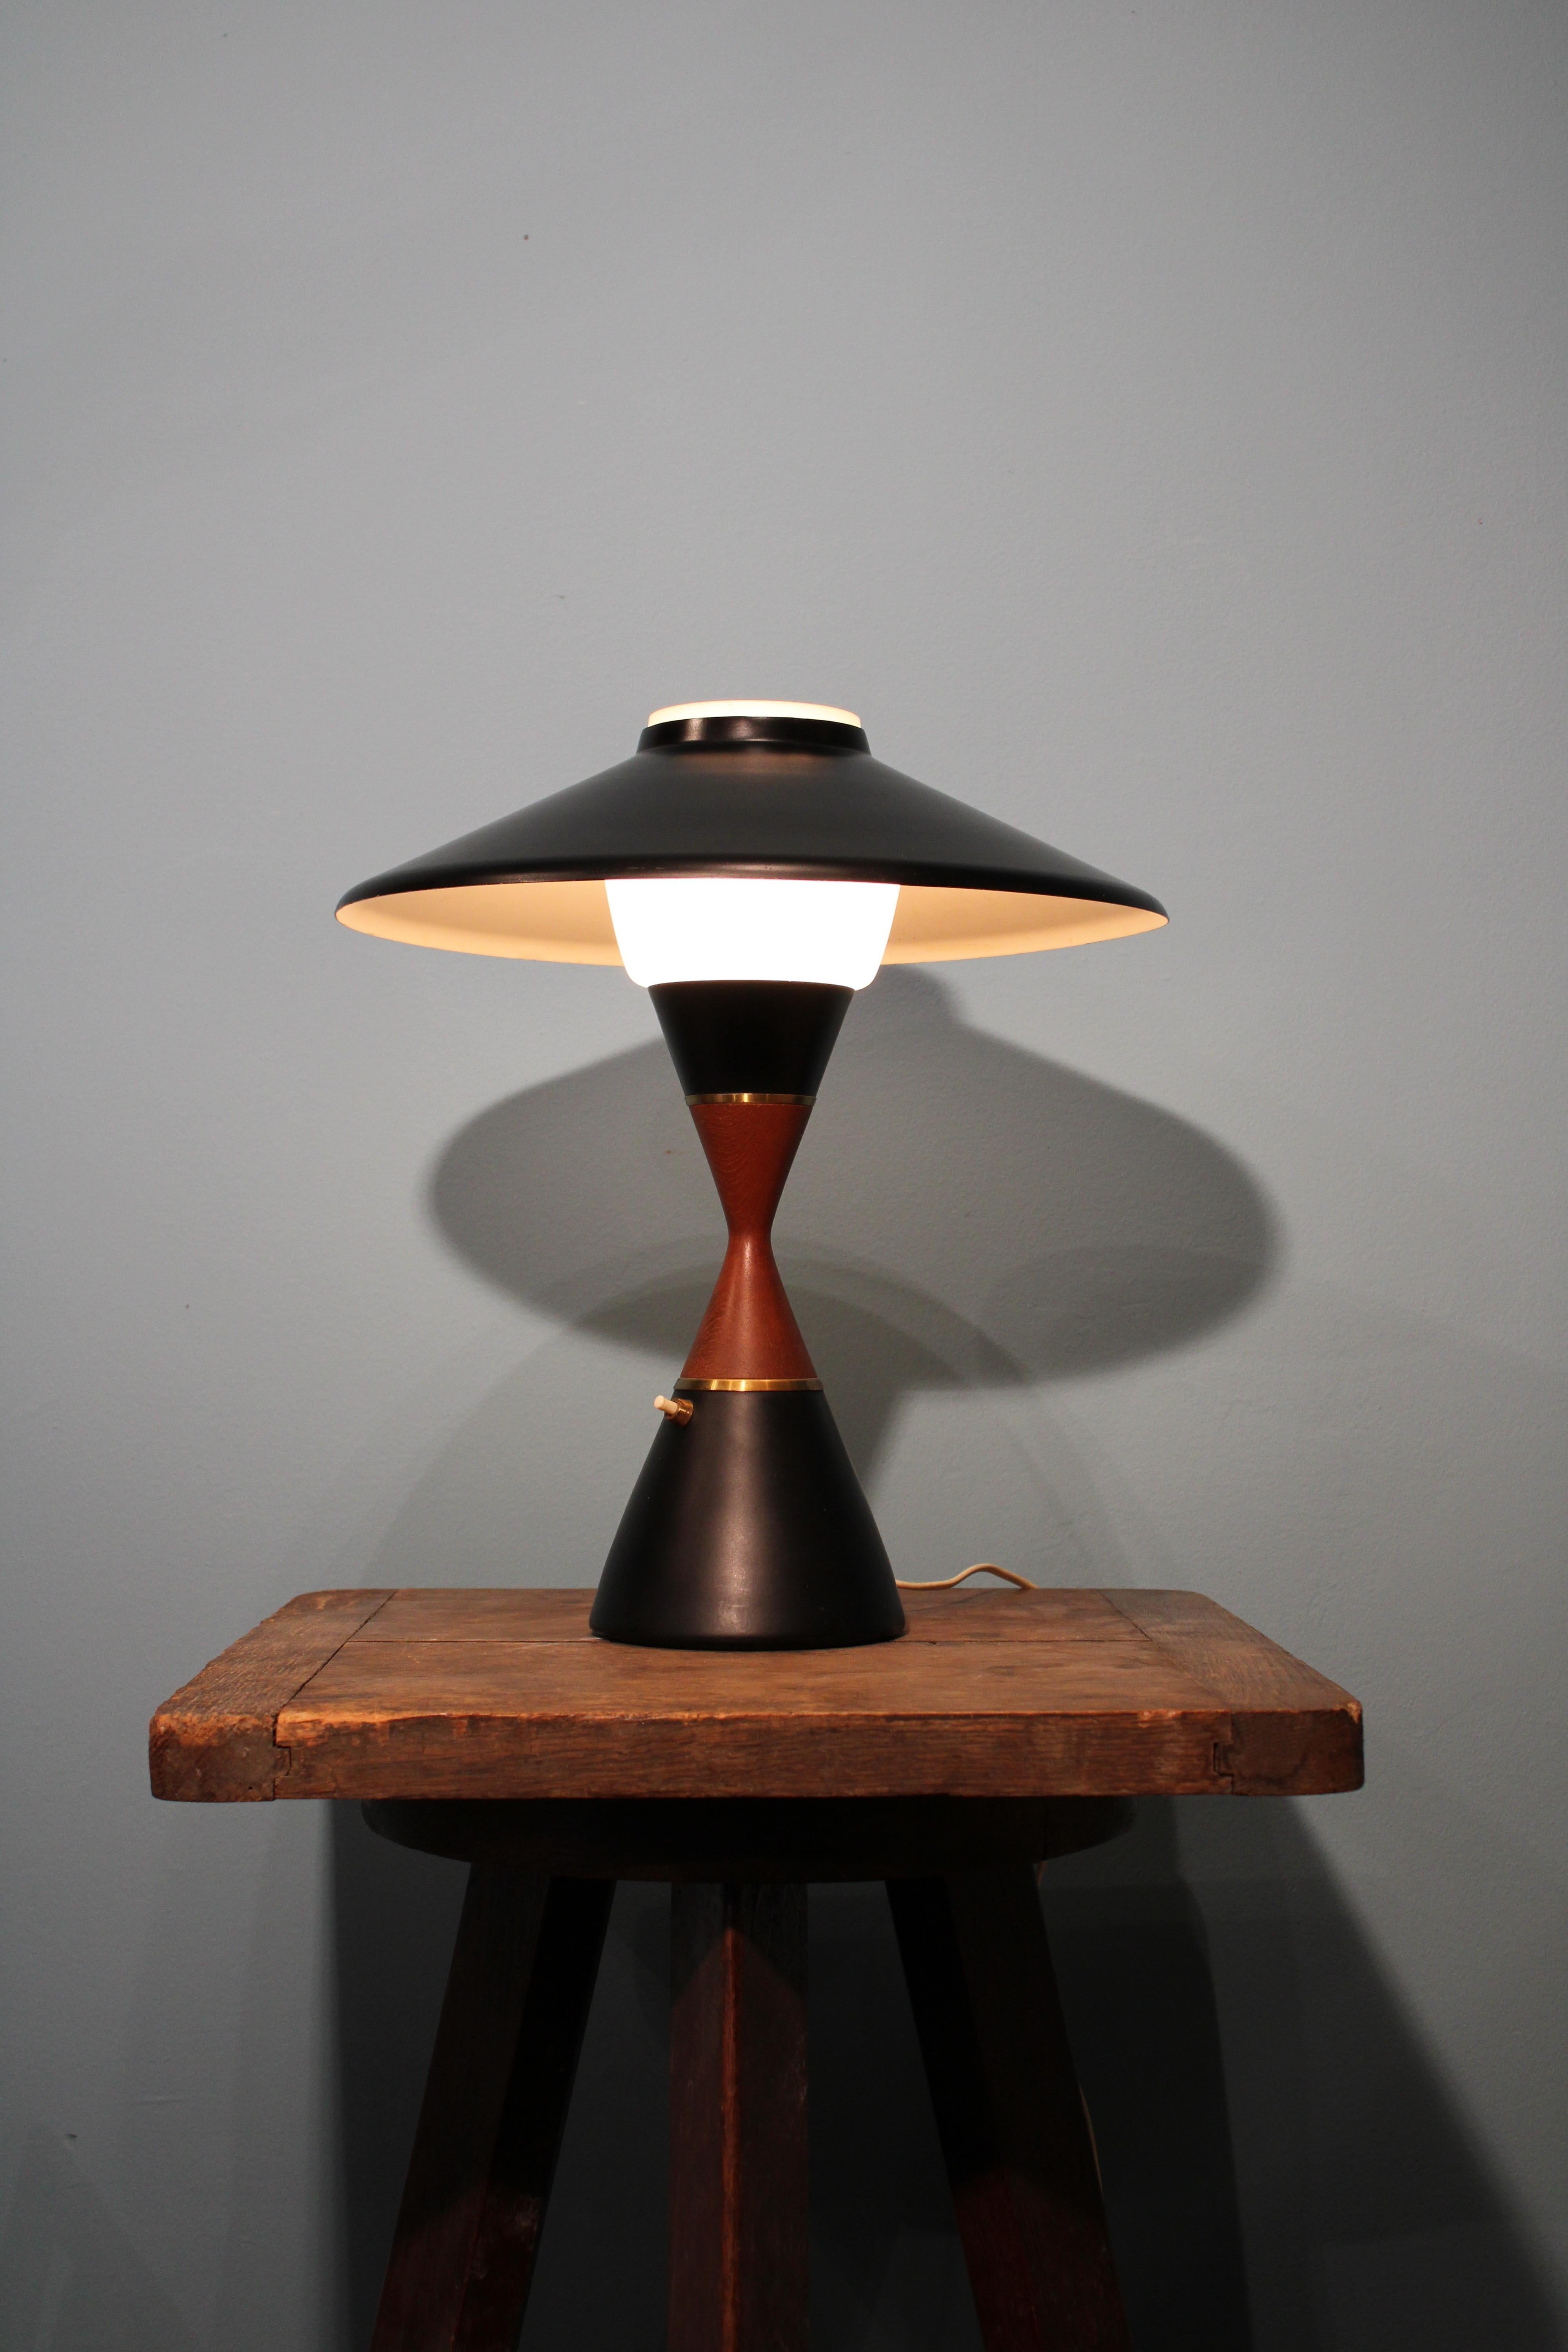 Table lamp by Svend Aage Holm Sorensen, Denmark, circa 1950-1960.
Opaline glass, brass and teak, shade in black lacquered metal.